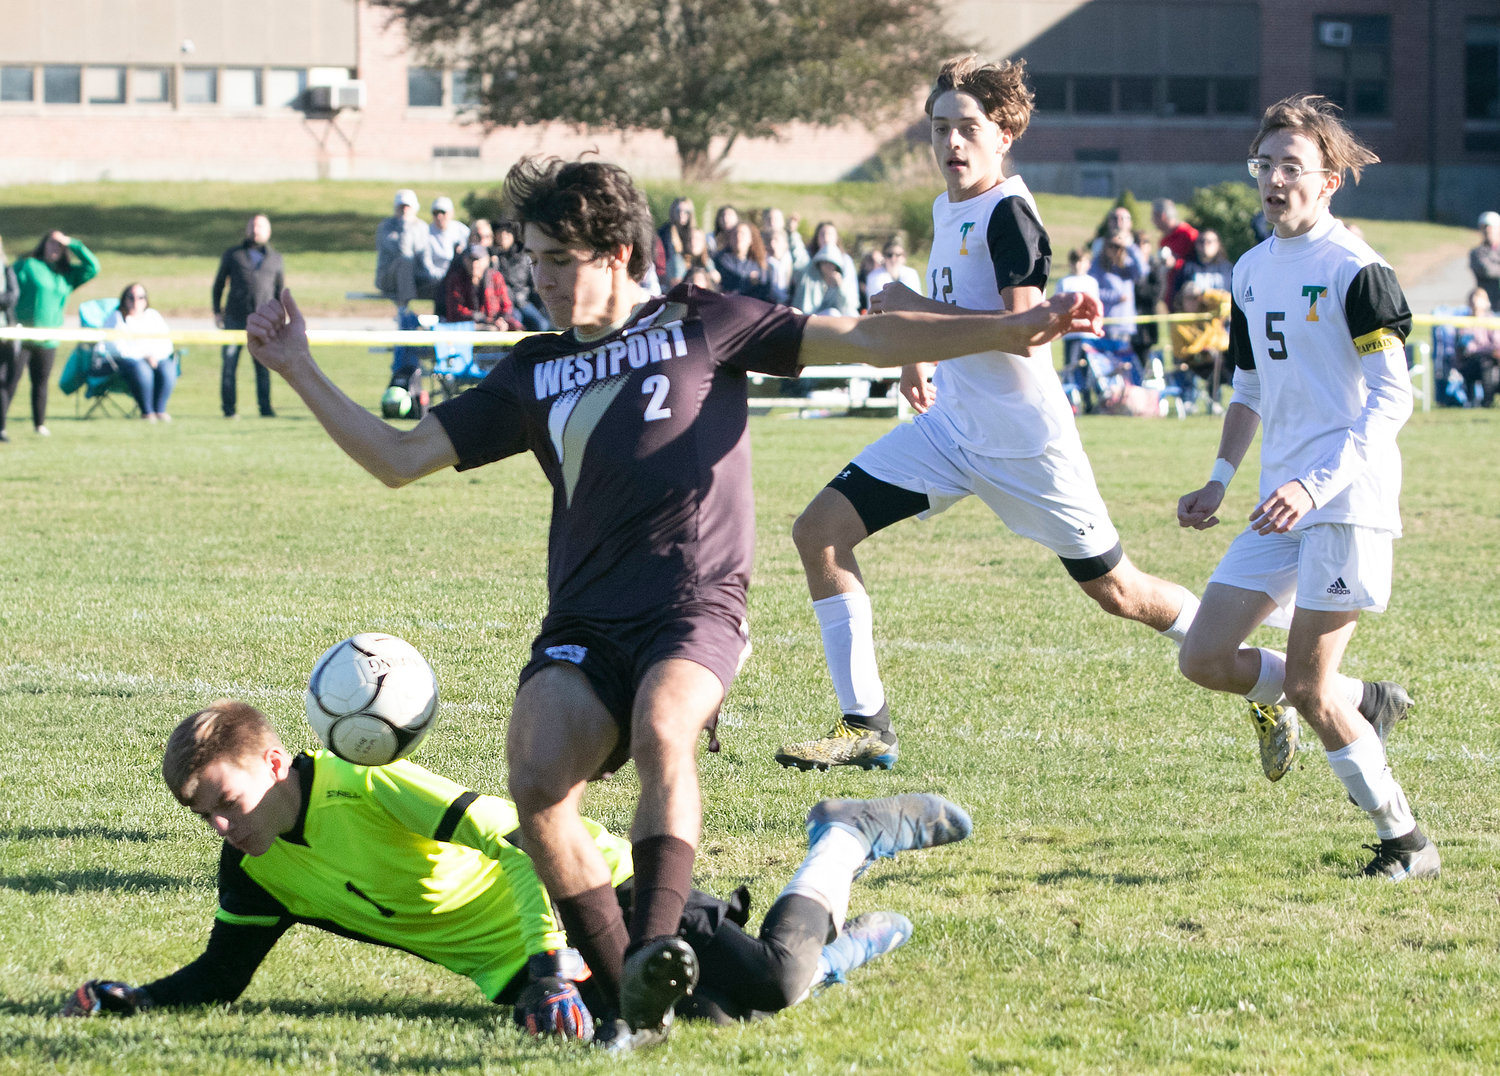 Striker Hunter Brodeur dribbles over Braves goalkeeper Tim Parsons and taps the ball into the net for his second goal of the game to give Westport a, 3-0 lead in the second half.